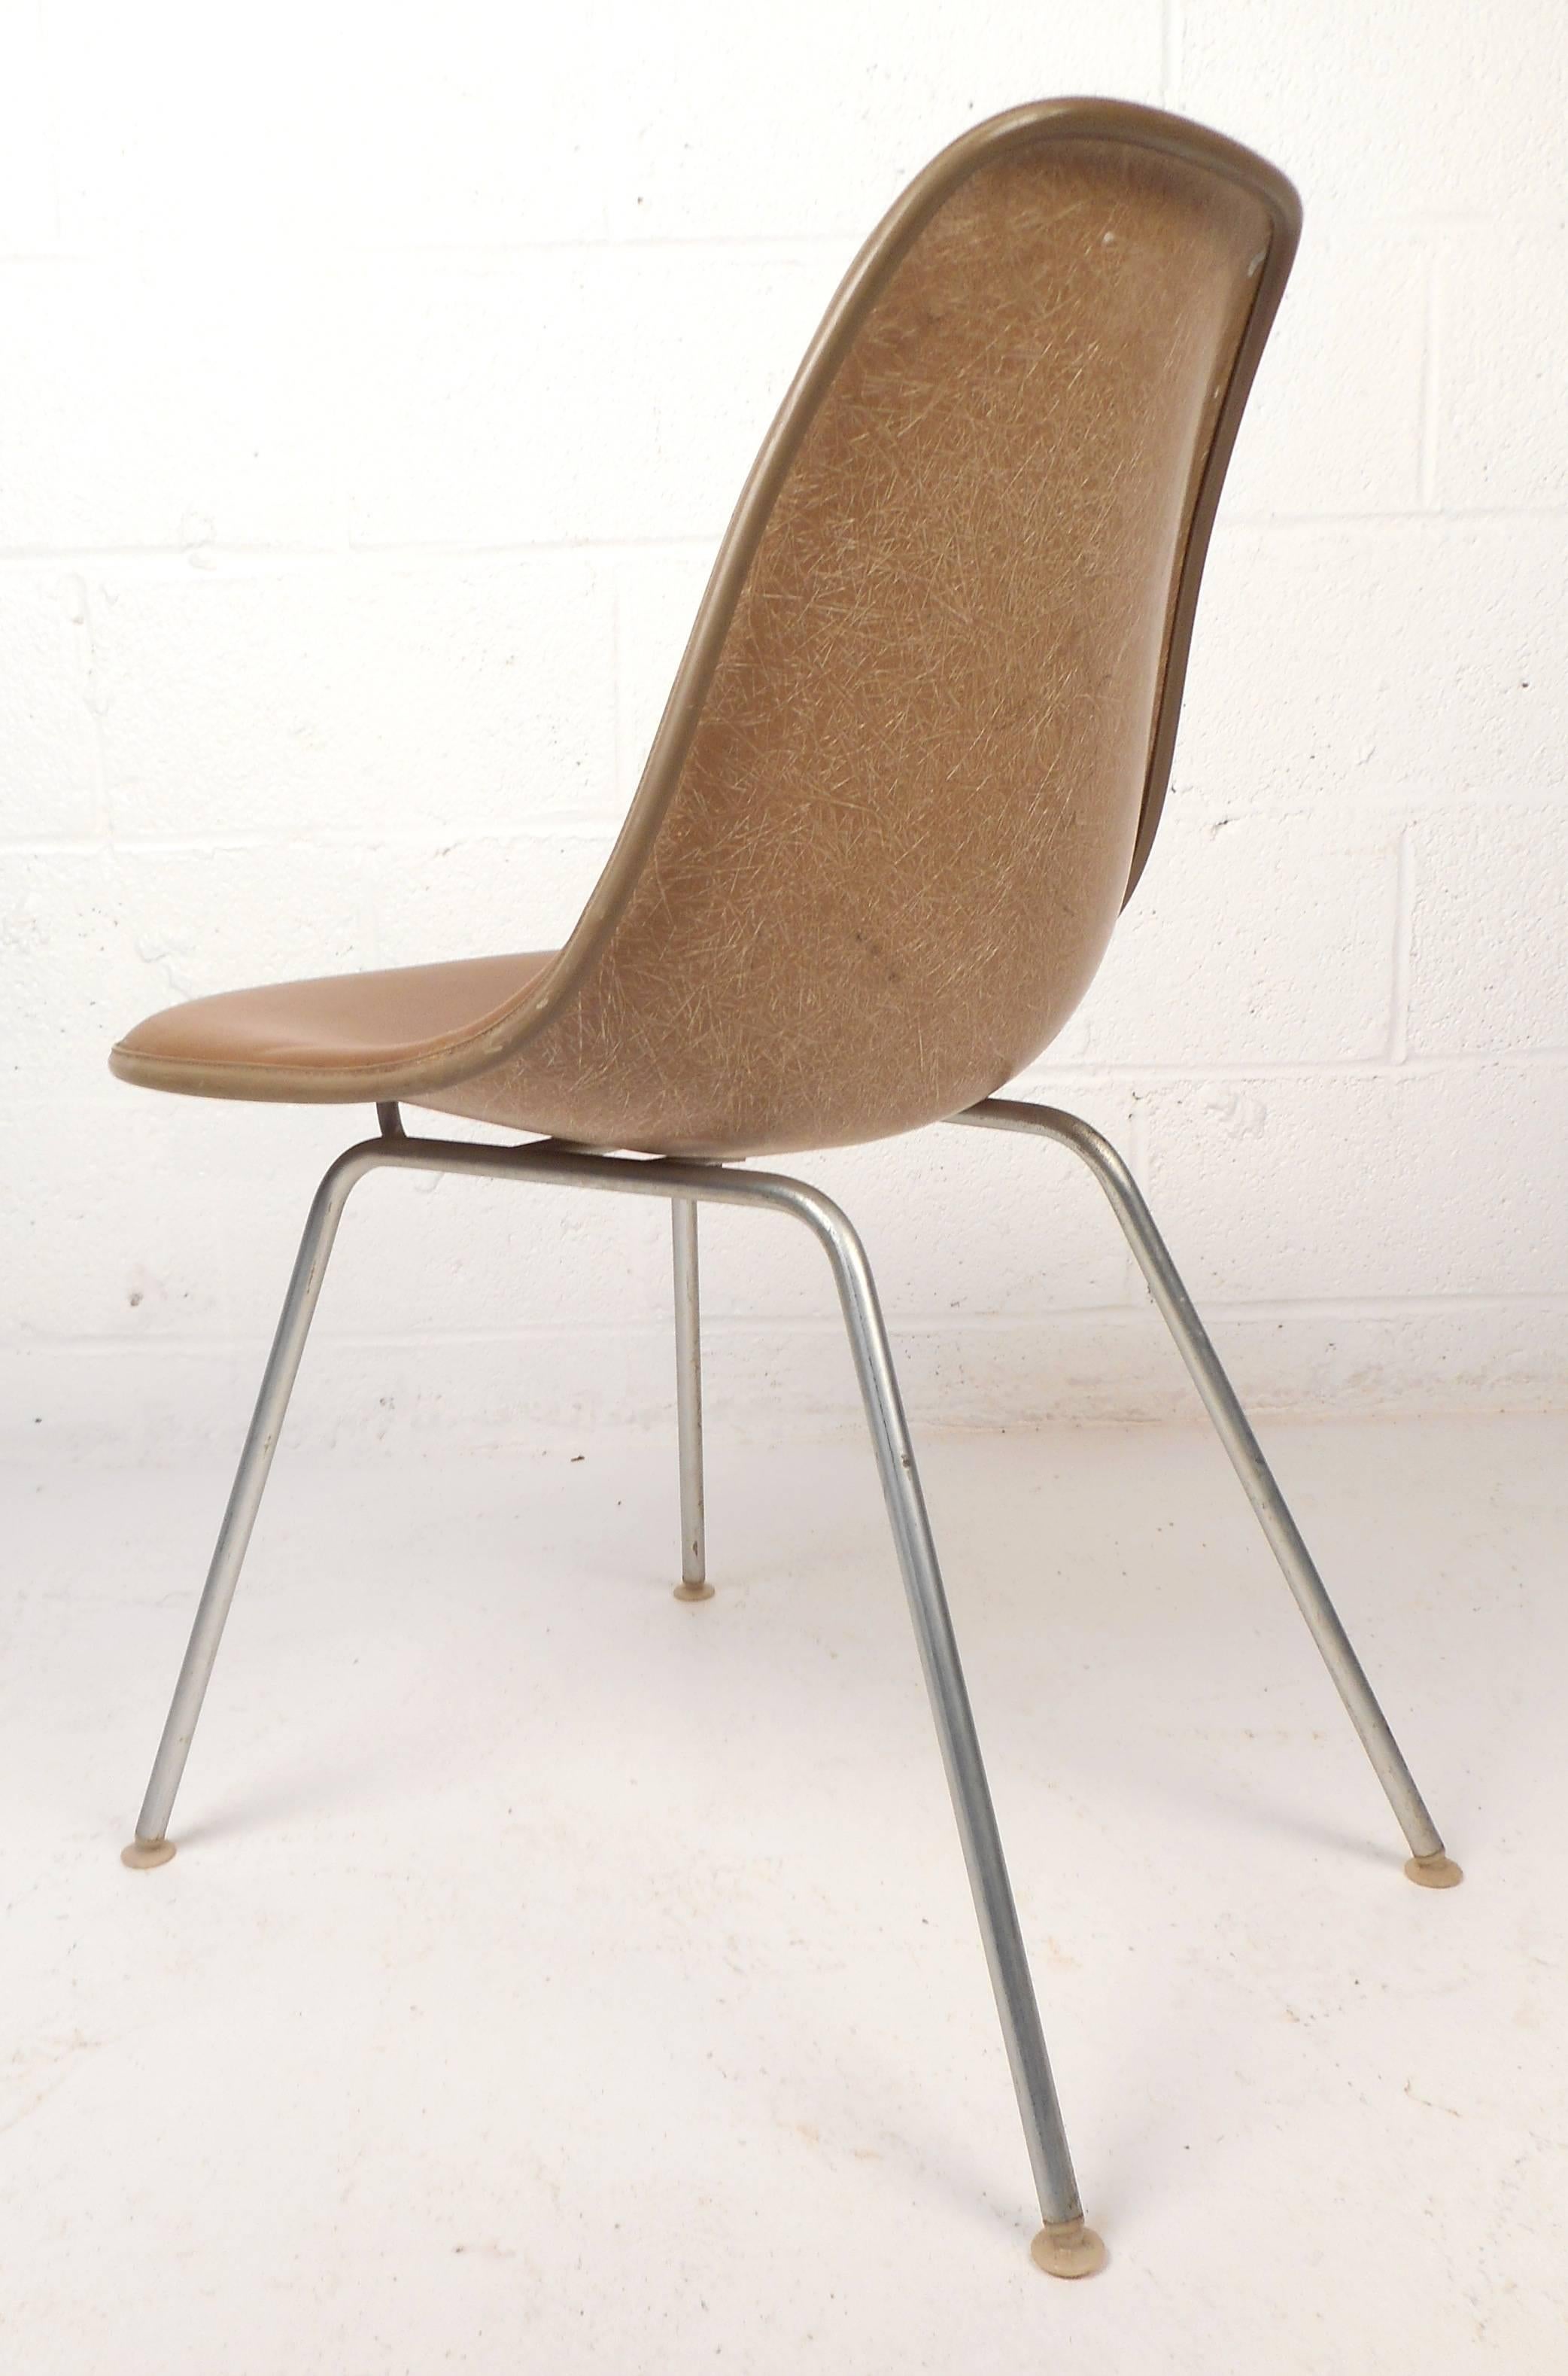 Mid-20th Century Set of Mid-Century Modern Fiberglass Shell Chairs by Herman Miller